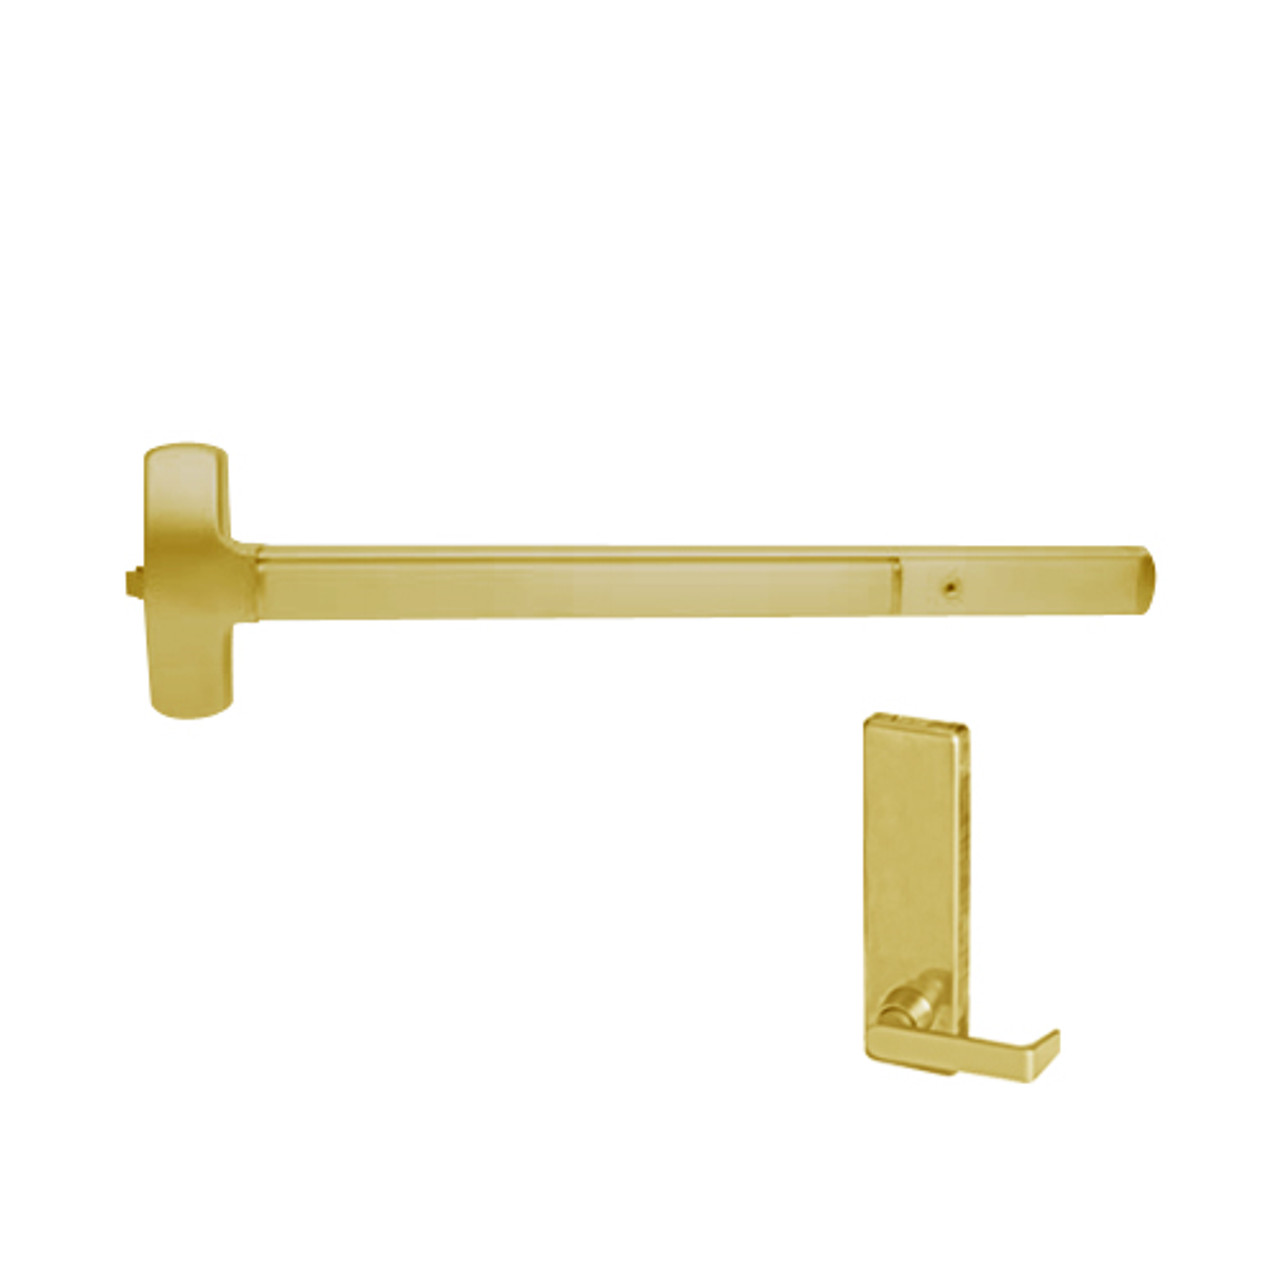 25-R-L-BE-DANE-US3-4-RHR Falcon Exit Device in Polished Brass